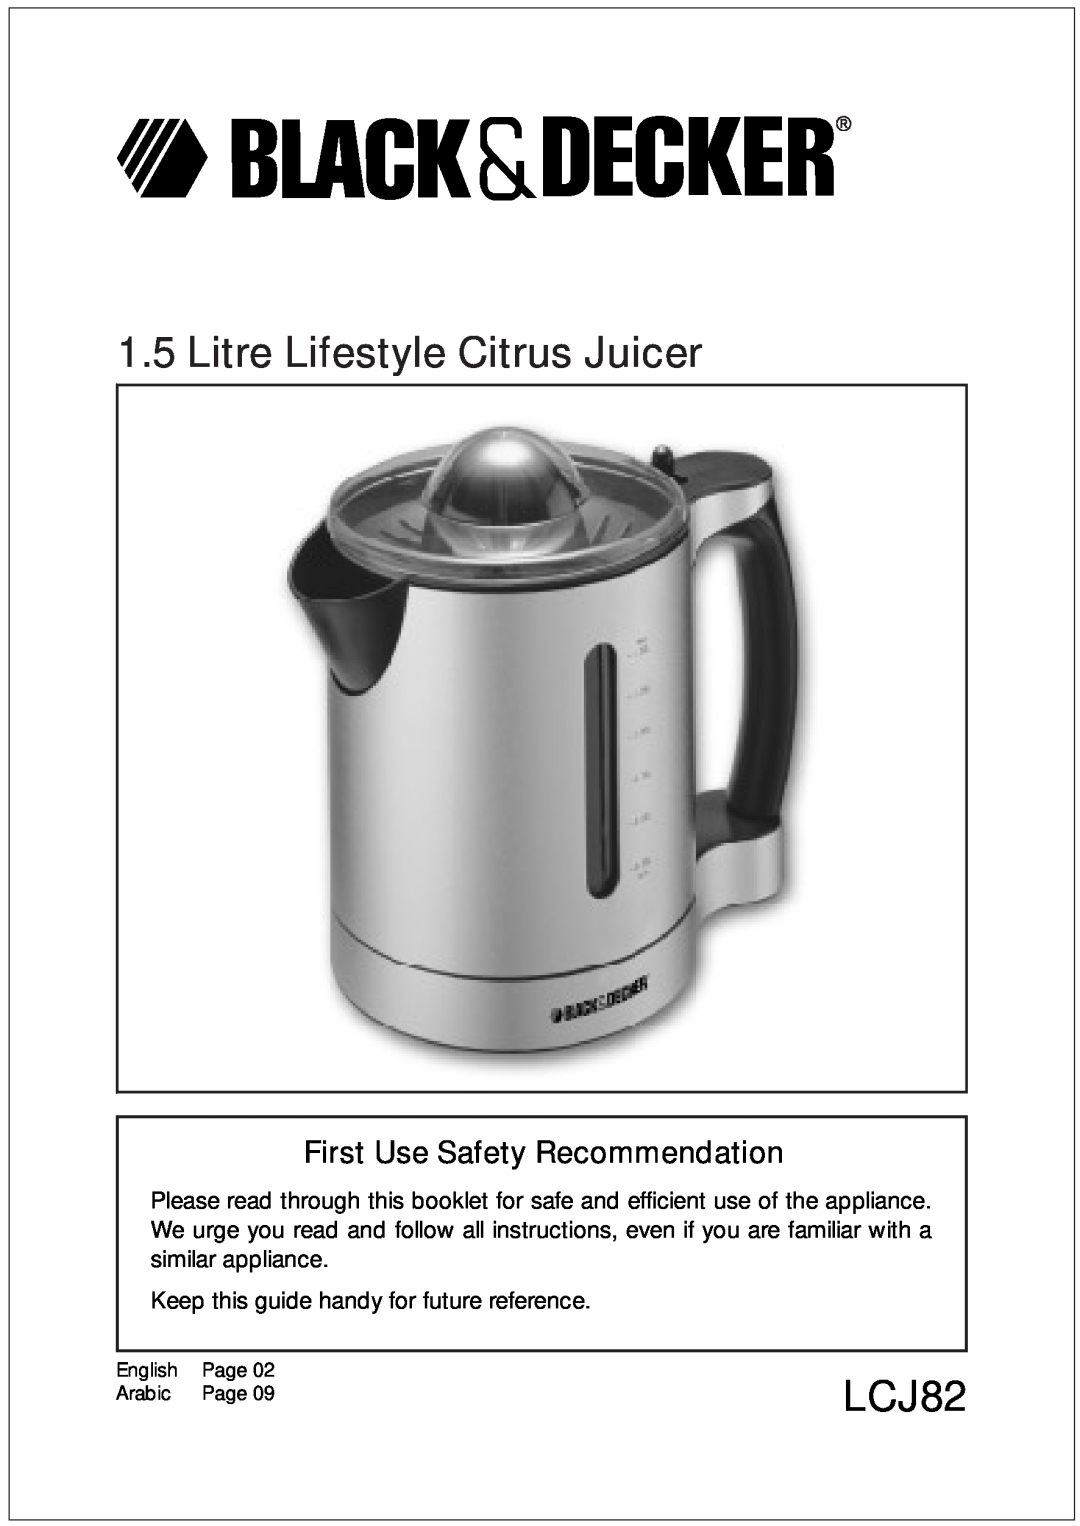 Black & Decker LCJ82 manual Keep this guide handy for future reference, Litre Lifestyle Citrus Juicer 